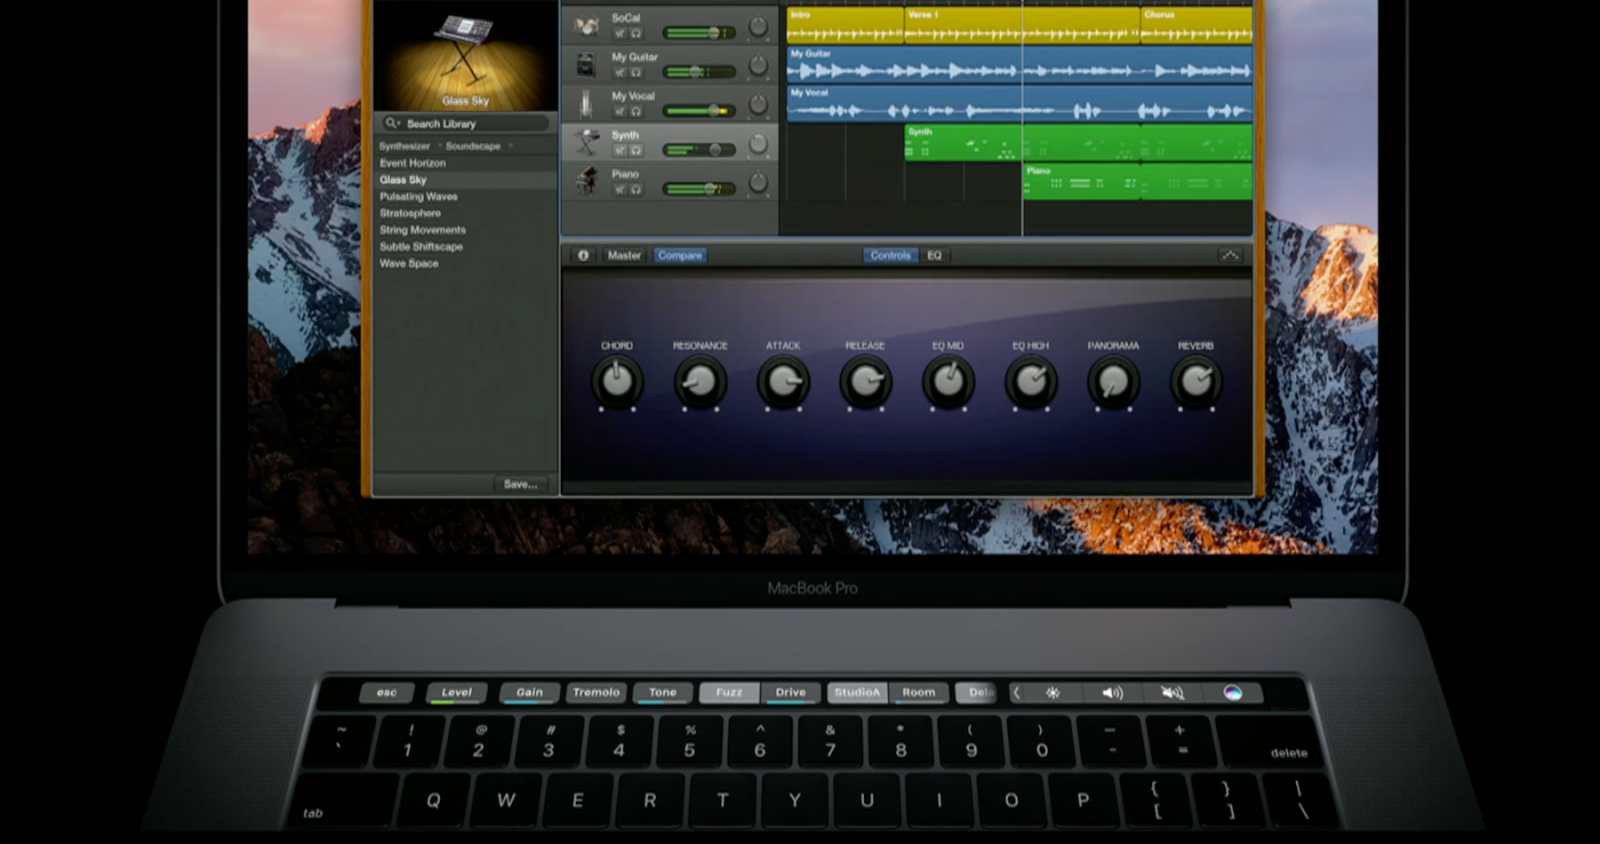 Does Mac Mini Come With Garageband